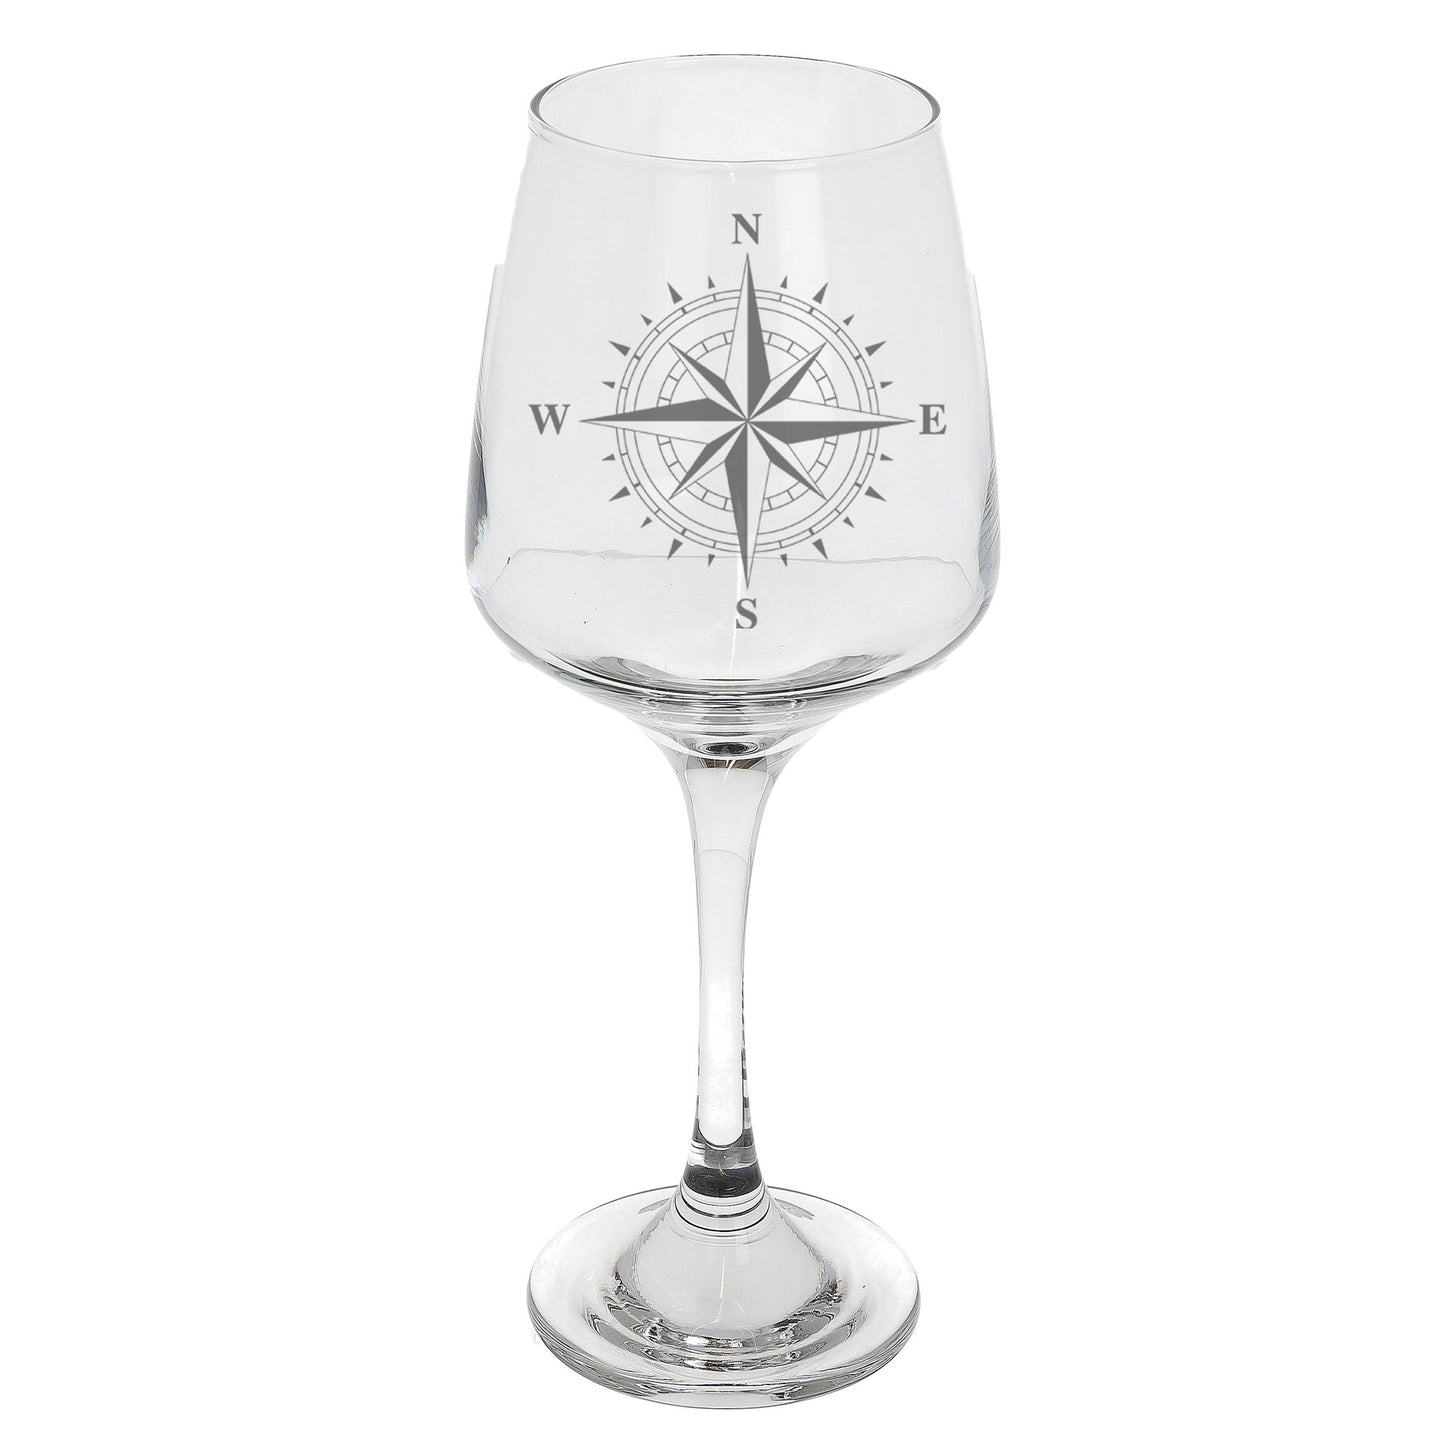 Compass Engraved Wine Glass and/or Coaster Set  - Always Looking Good - Wine Glass Only  